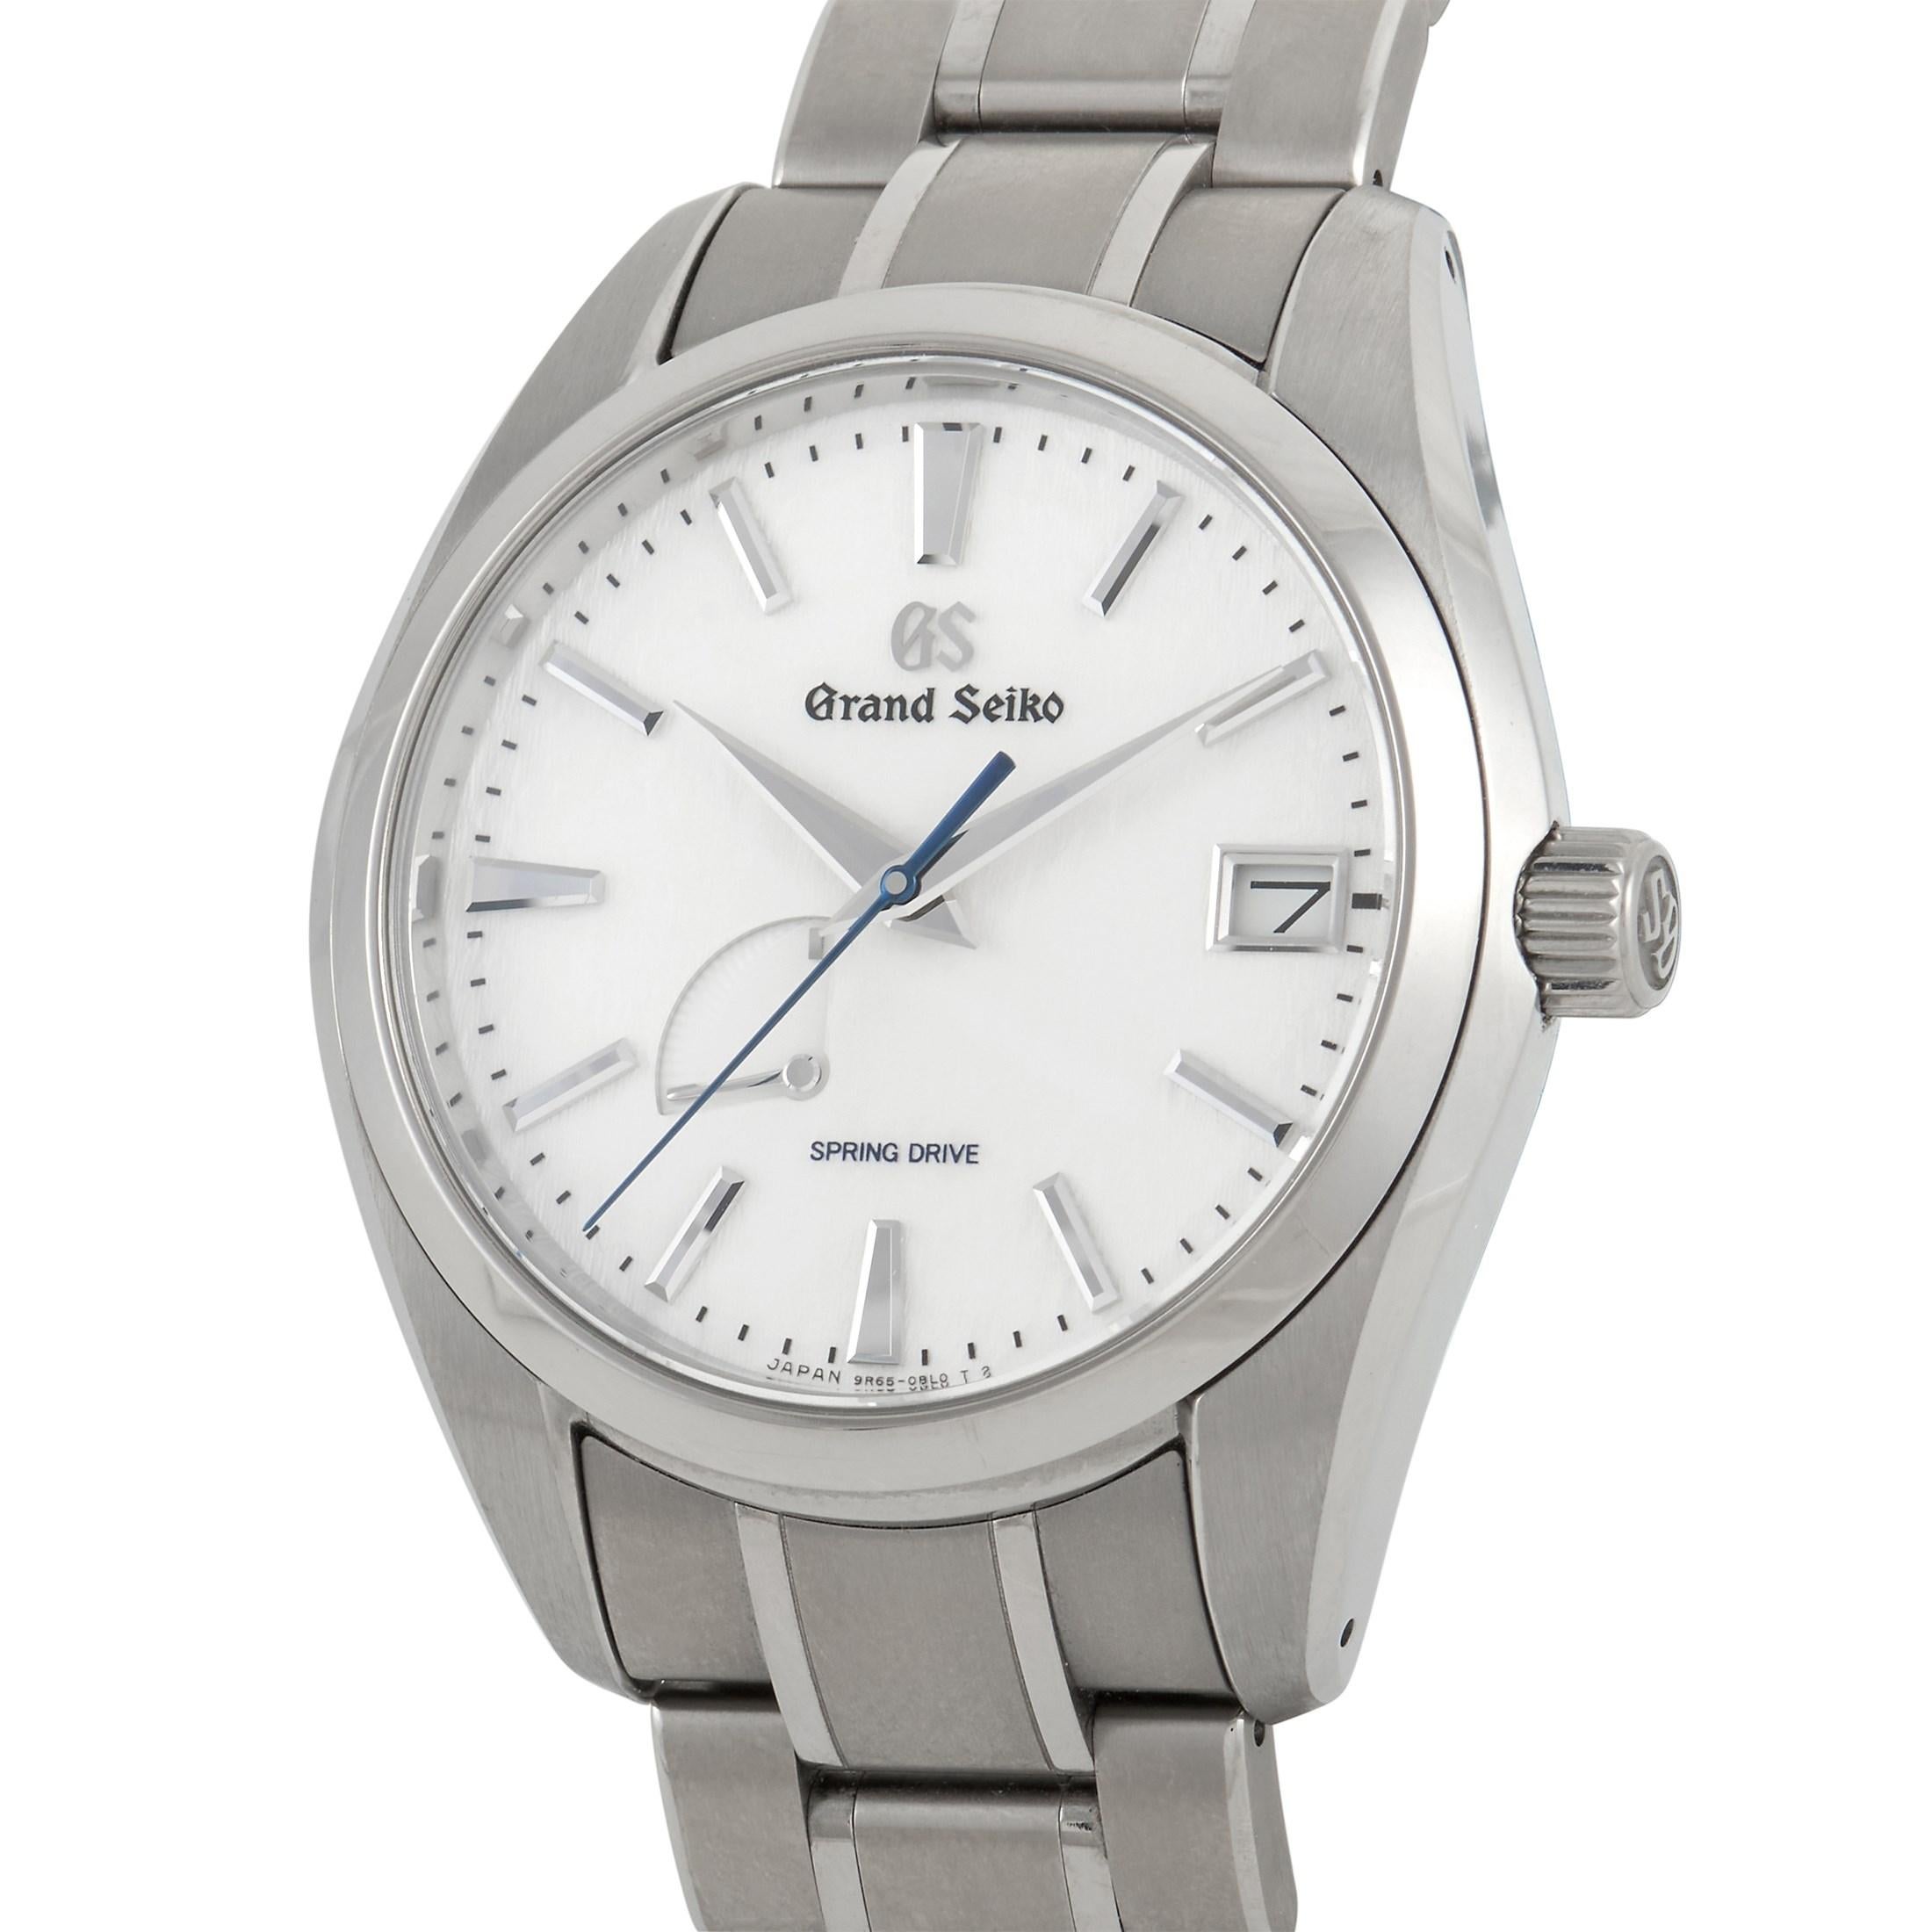 The Grand Seiko Snowflake Spring Drive Watch, reference number SBGA211, is a timeless piece with universal appeal. 

The beauty of this traditional timepiece begins with the 41mm titanium case. Attached to a titanium bracelet, the white minimalist